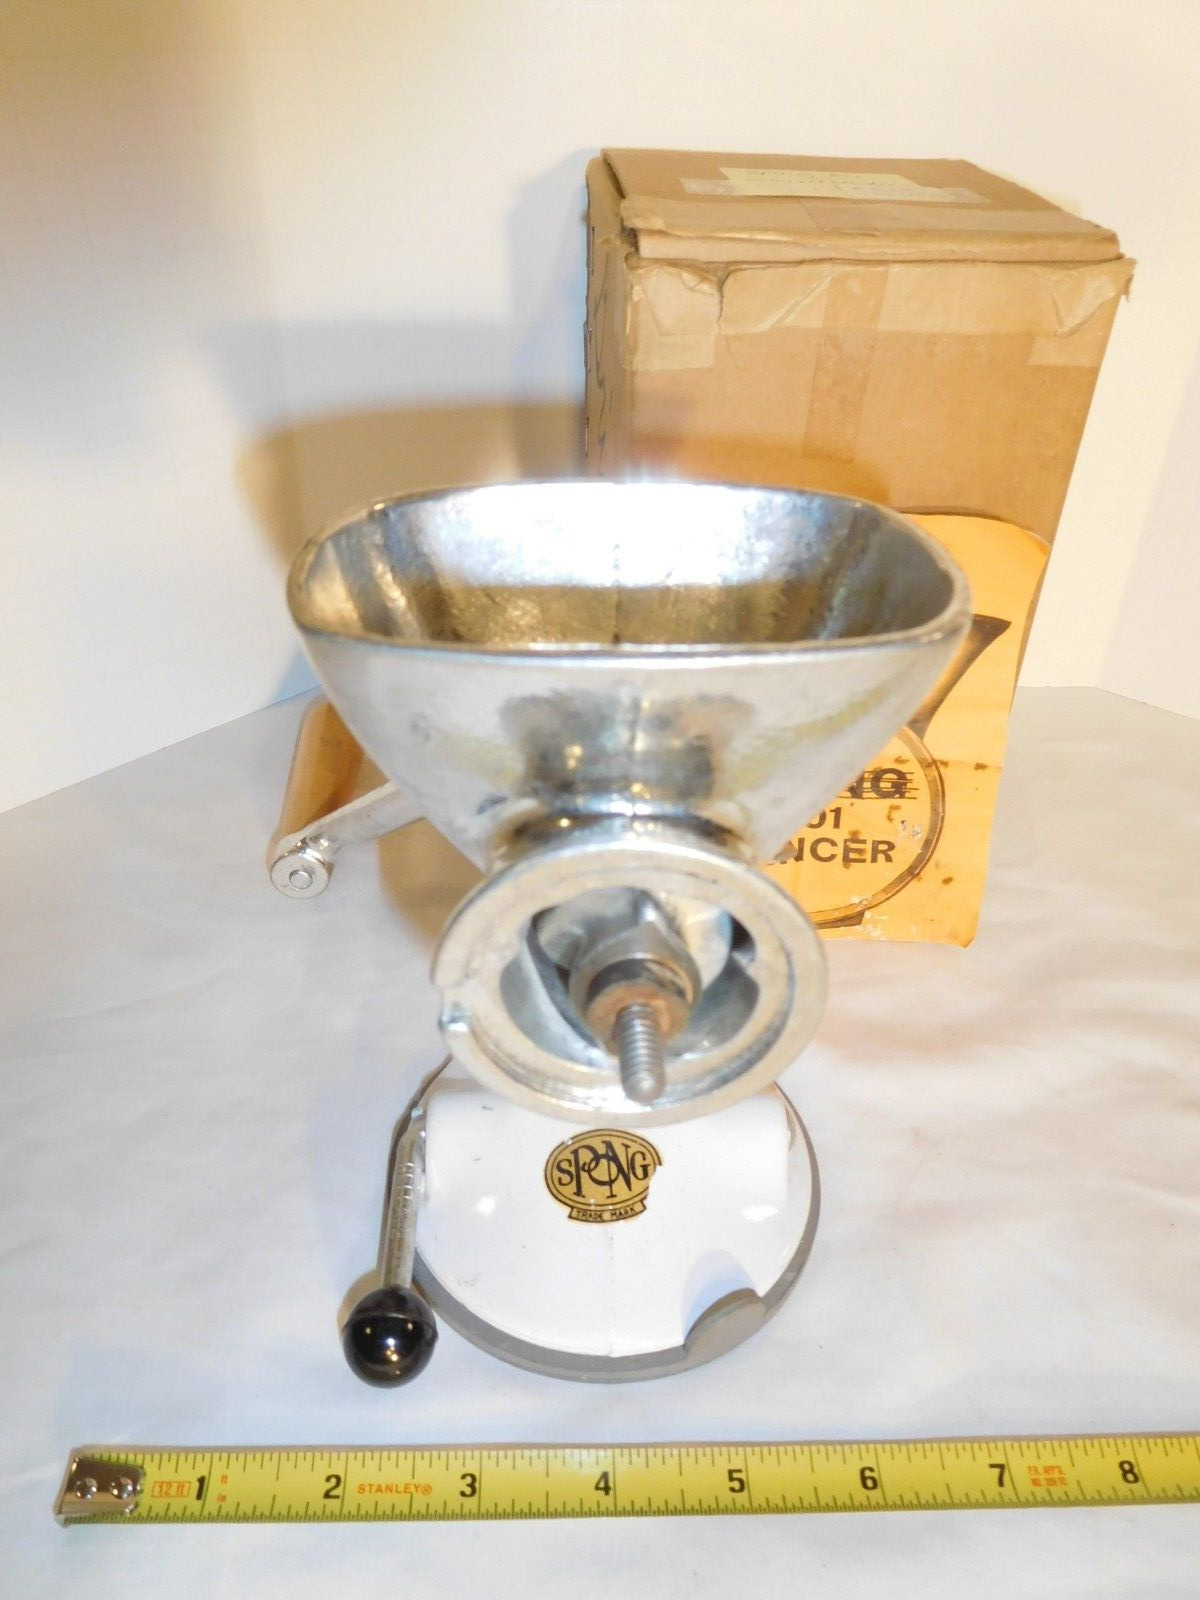 Vintage England New In Box Compact Spong 601 Mincer/Grinder w/Parts/ Instruction